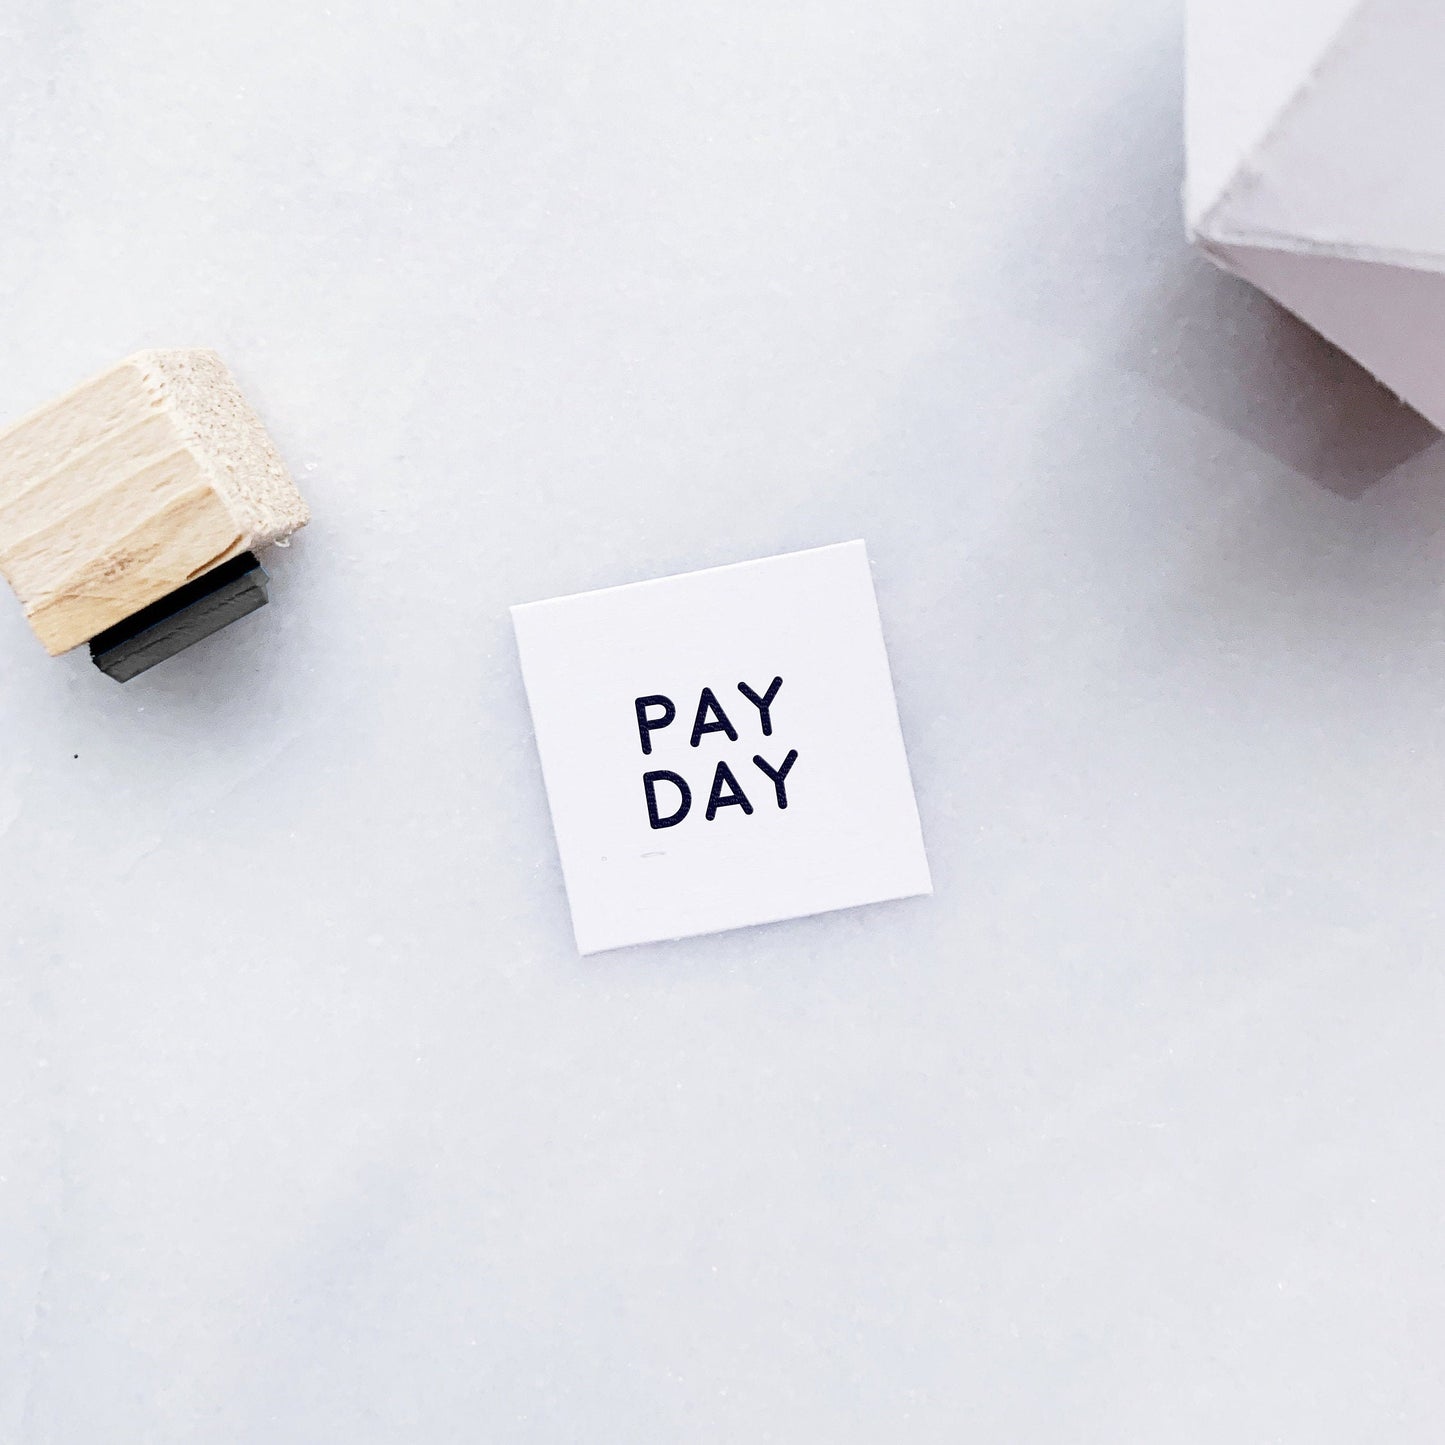 Pay Day Text Rubber Stamp